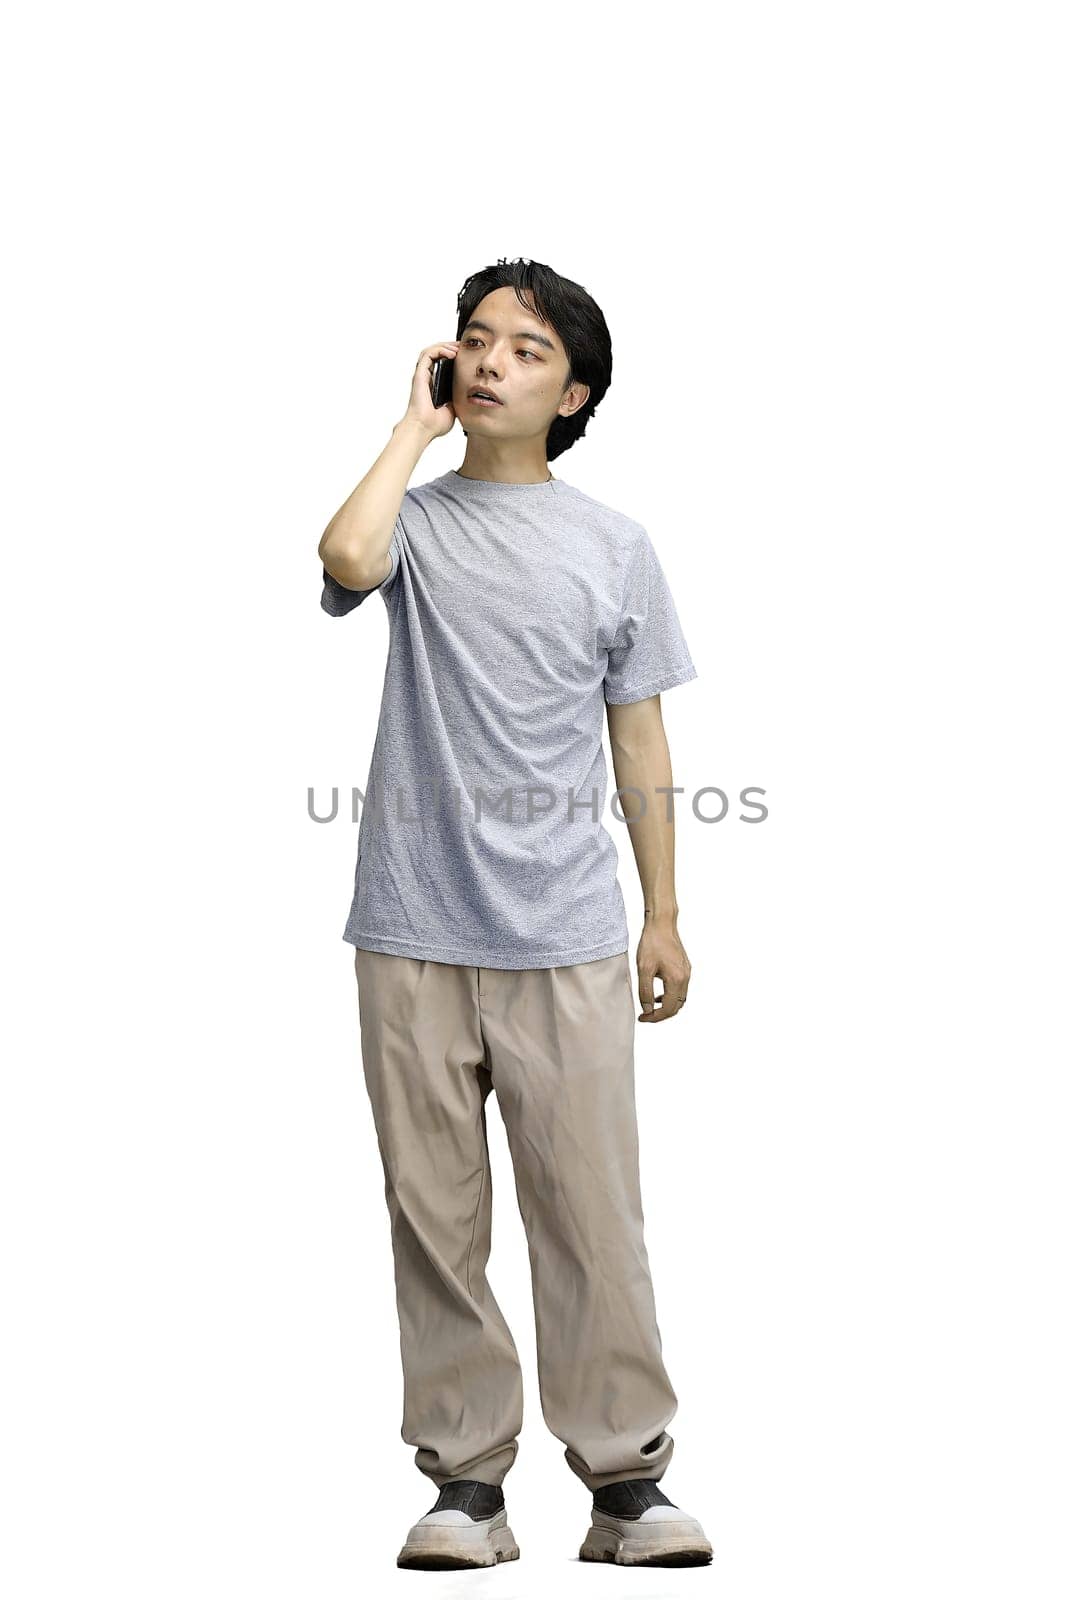 A guy in a gray T-shirt, on a white background, full-length, talking on the phone by Prosto